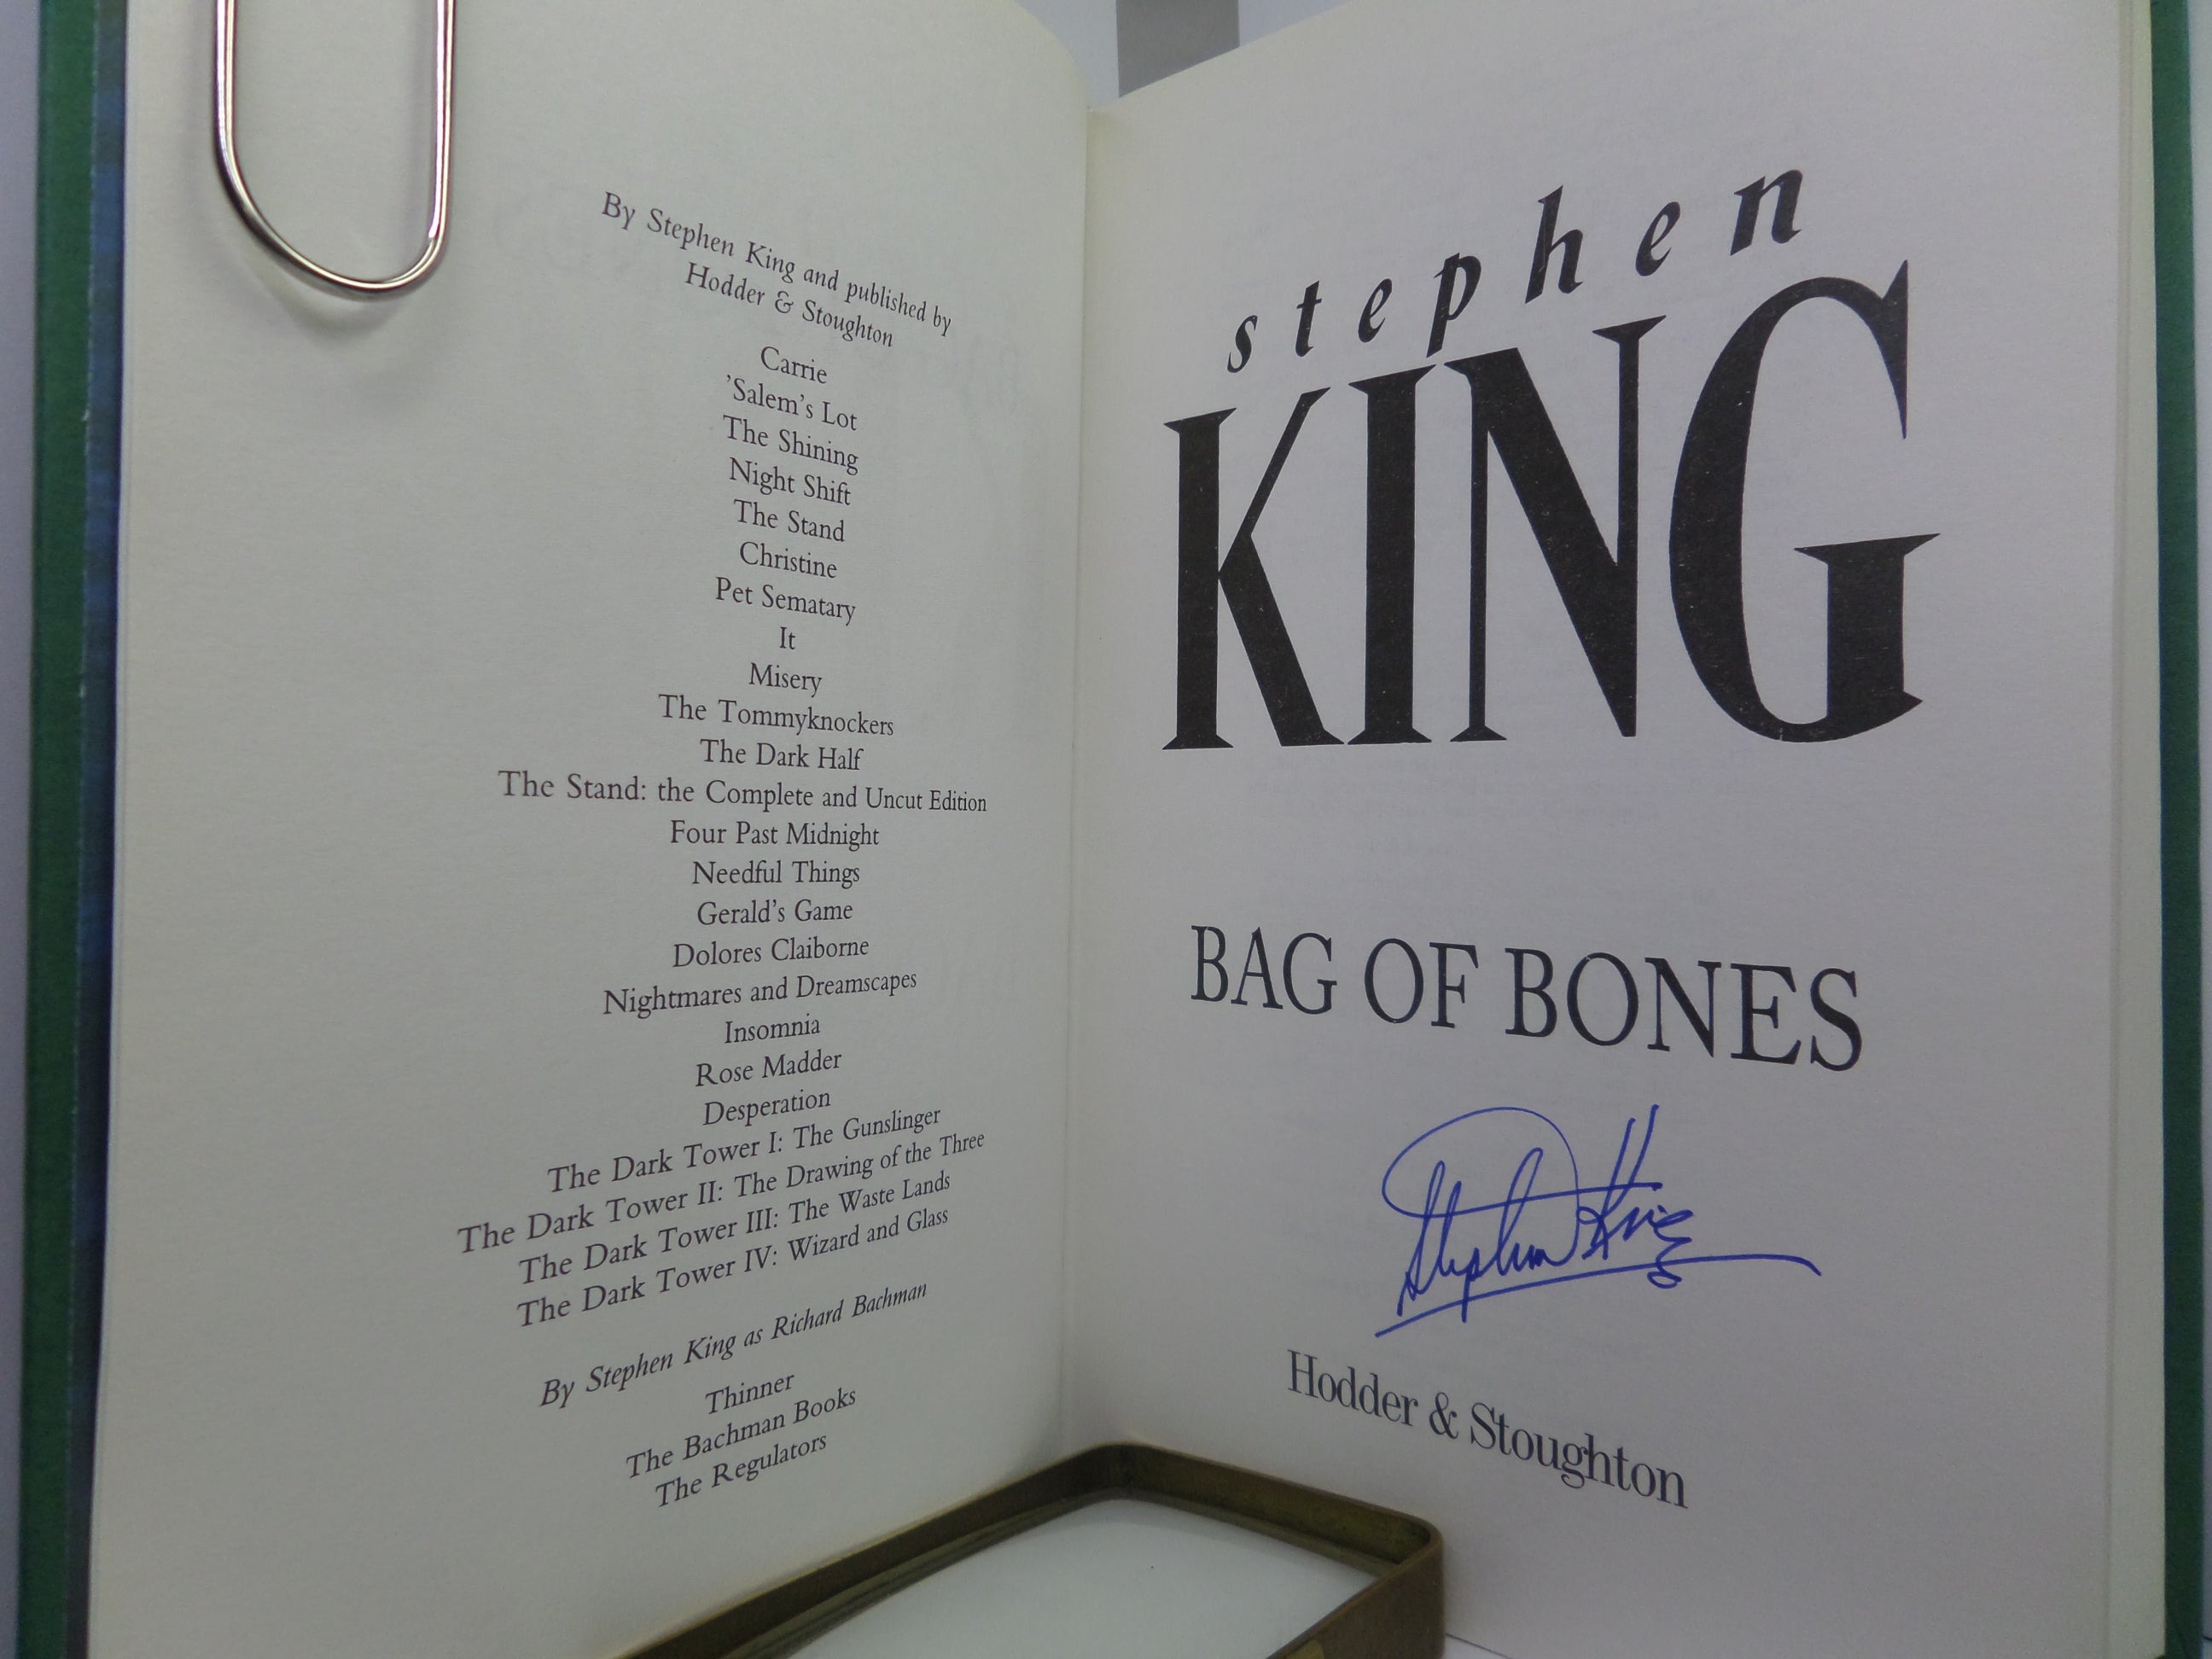 BAG OF BONES BY STEPHEN KING 1998 SIGNED UK FIRST EDITION, HARDCOVER